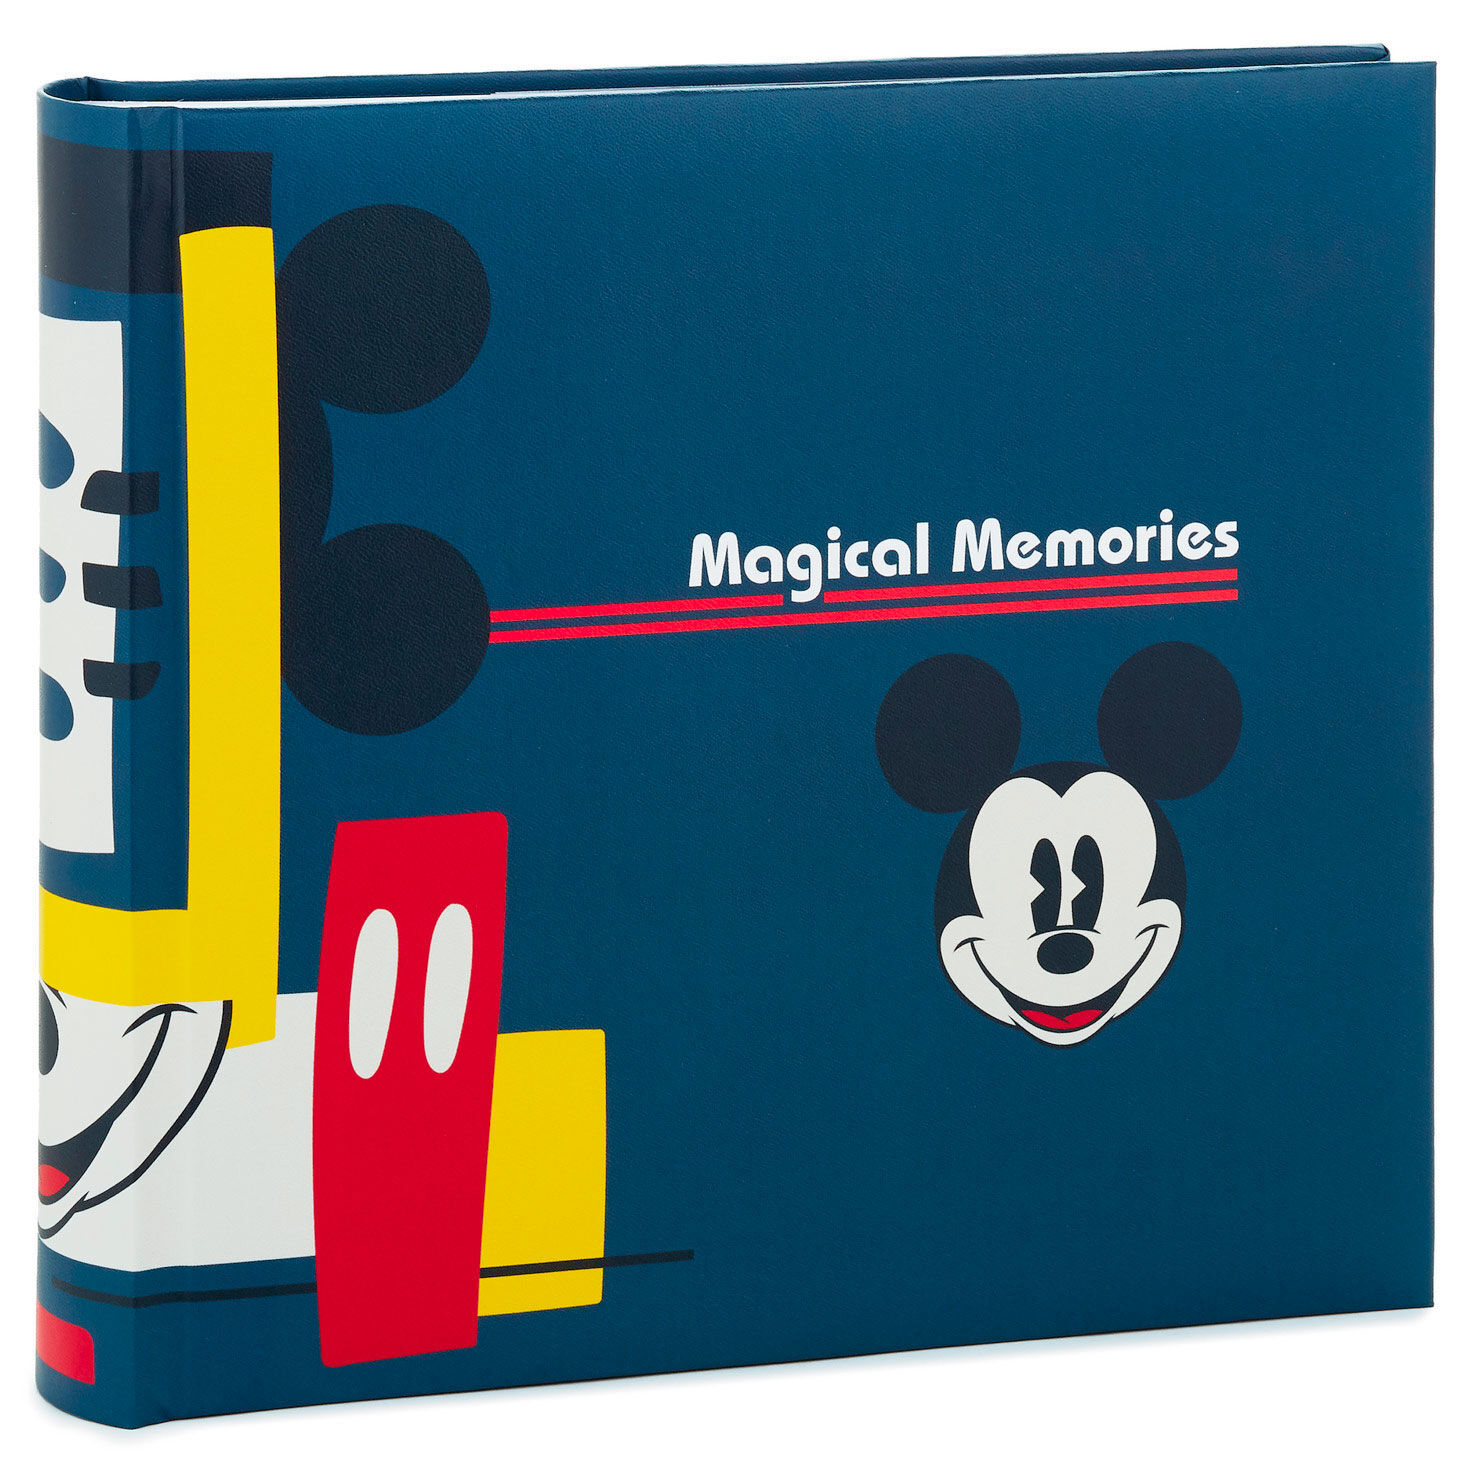 PHOTOS: NEW 2021 Dated Merchandise (Photo Album, Mickey Plush, Ornament,  and More) Arrives at Walt Disney World - WDW News Today